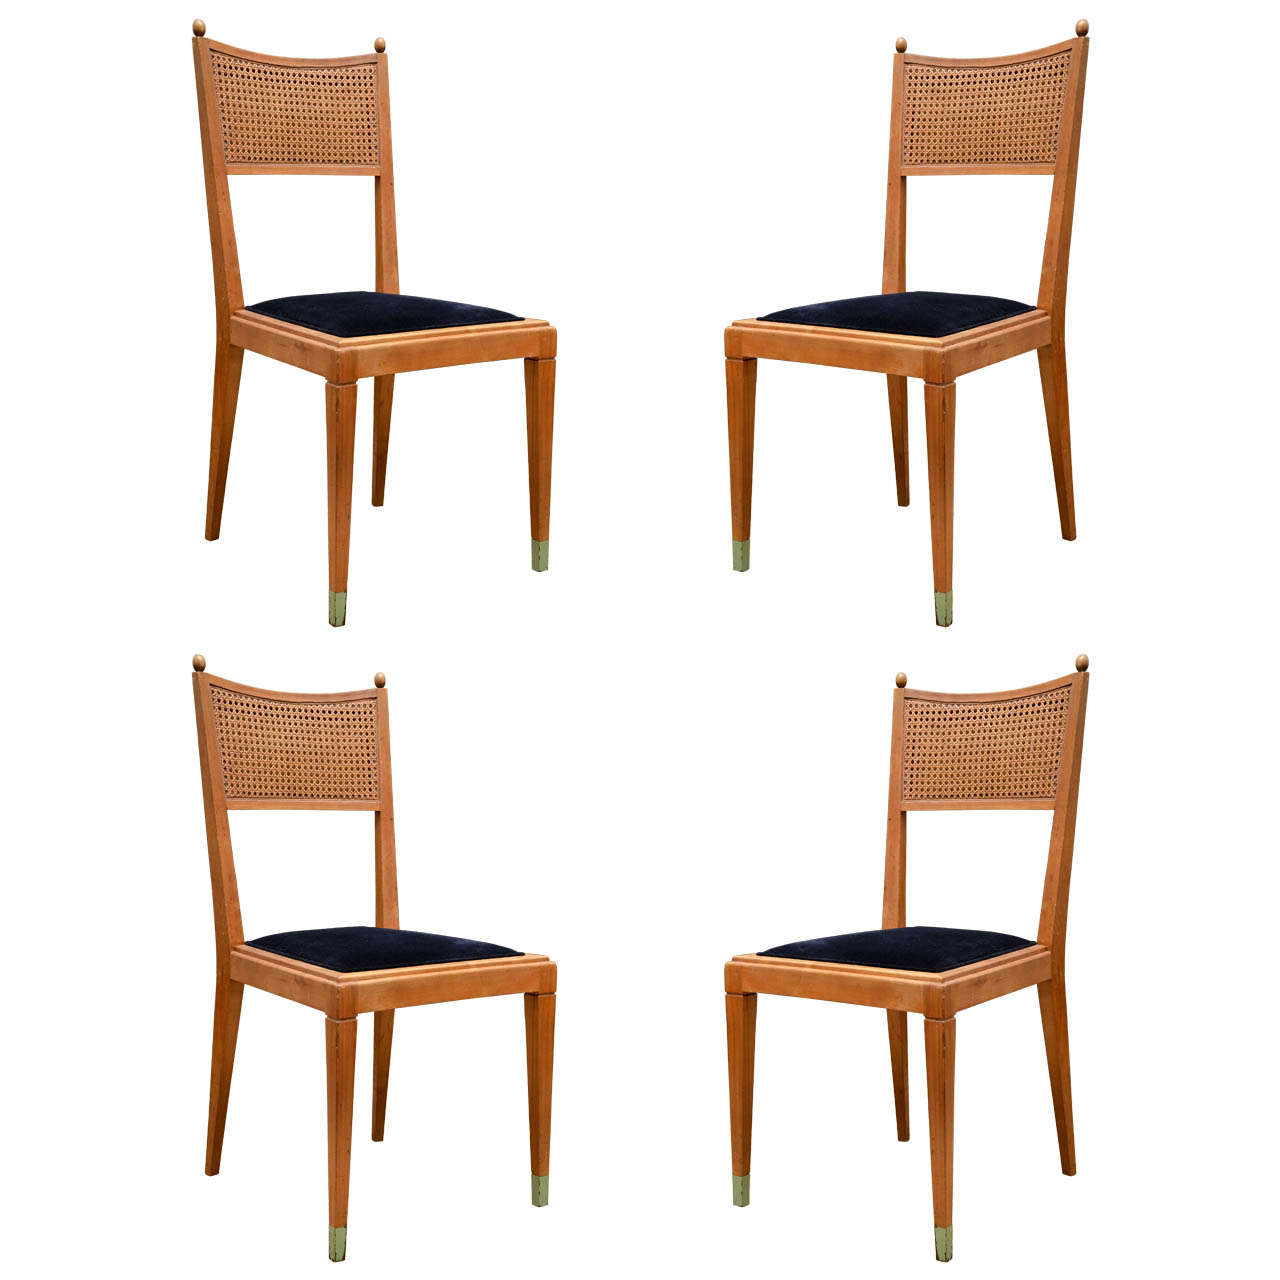 Set of Four Caned Back Chairs with Painted Sabots